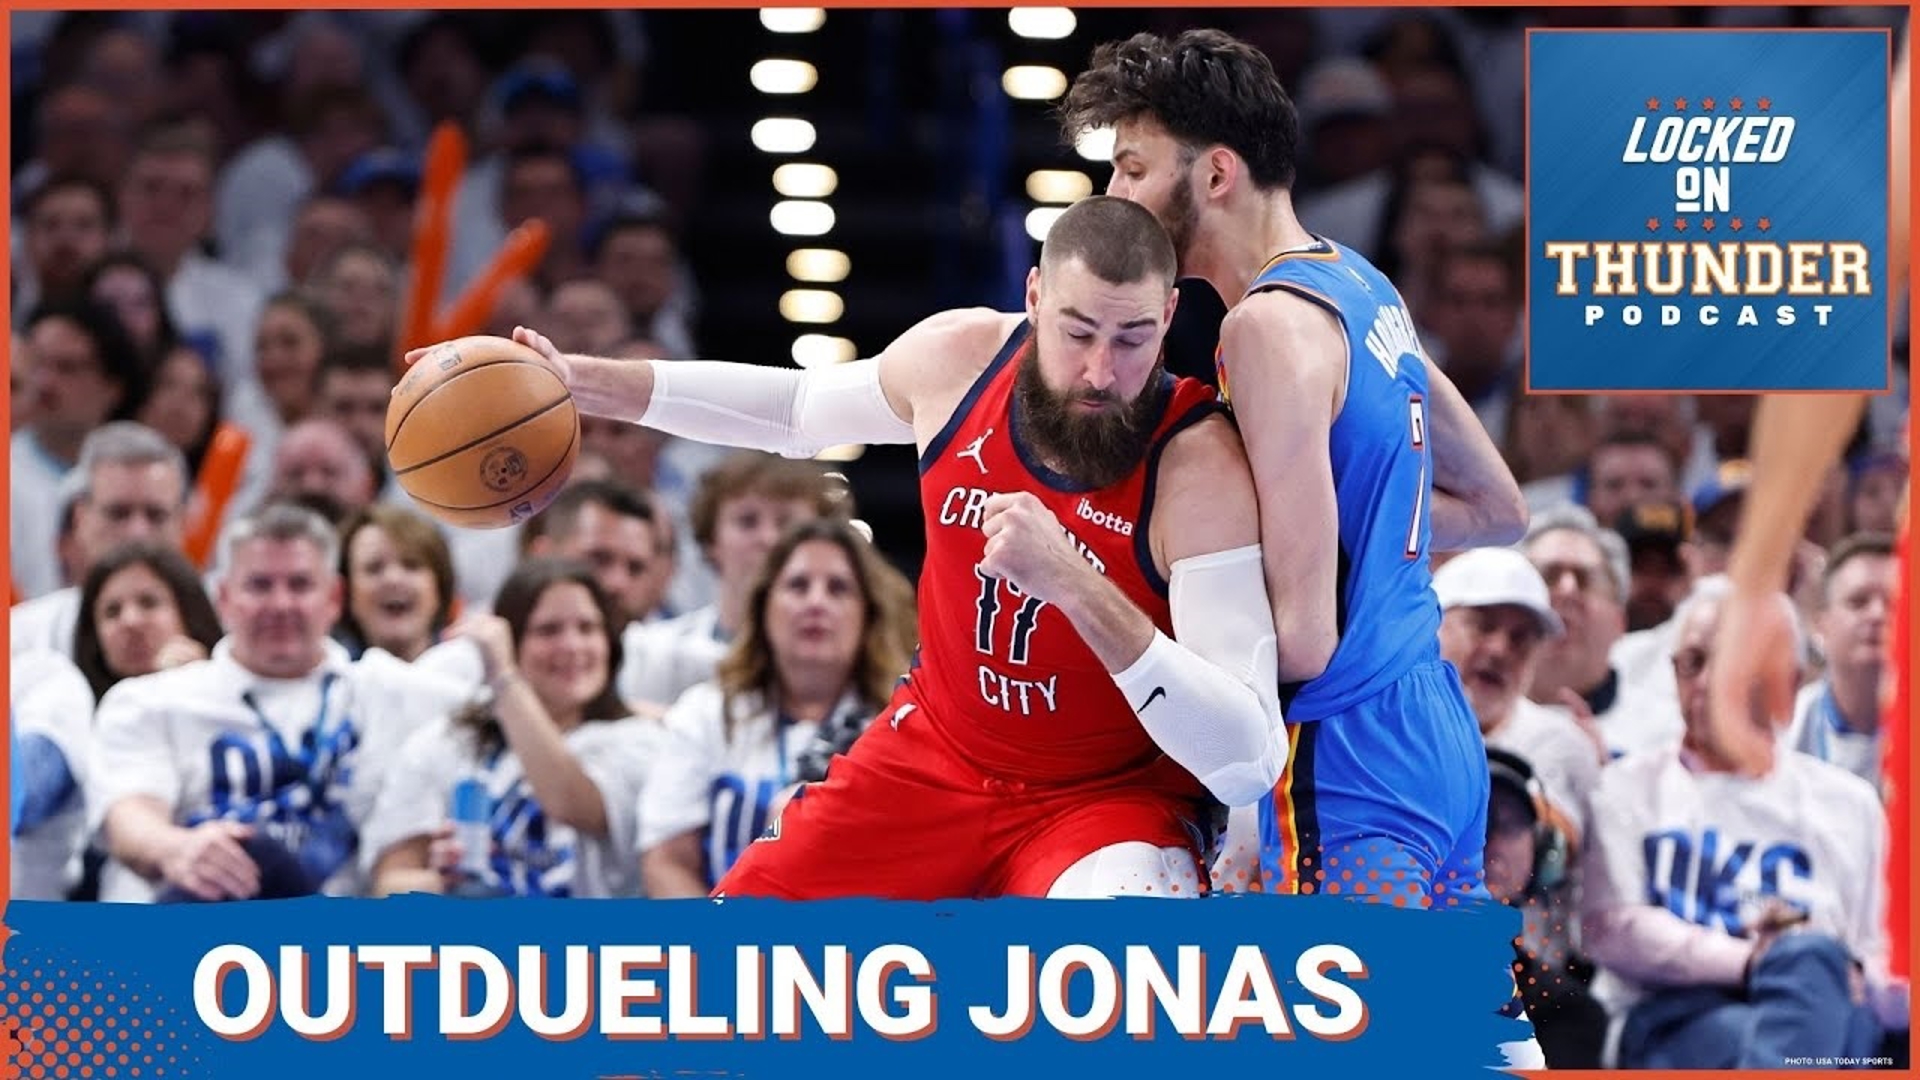 The Oklahoma City Thunder own a commanding 2-0 lead over the New Orleans Pelicans, no team has ever come back from down 0-3. Can the Pelicans make any adjustments?